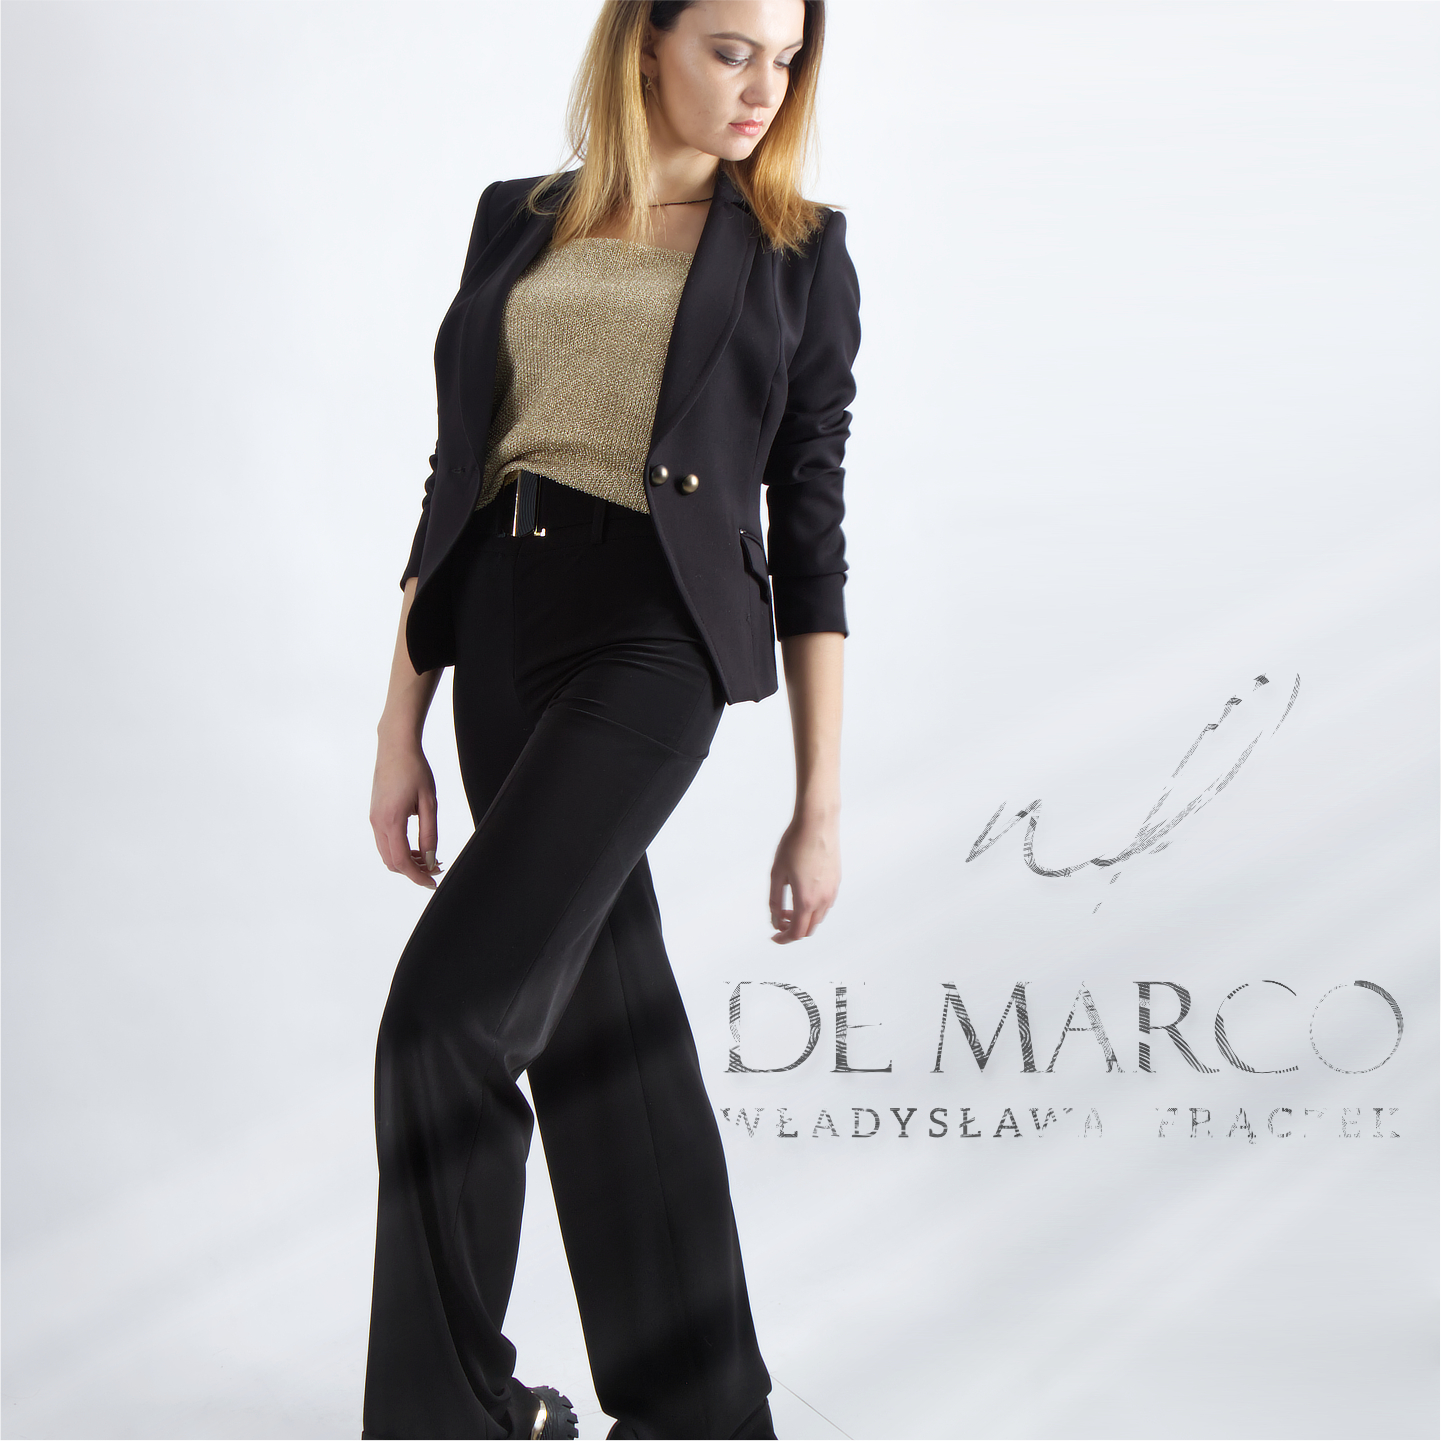 Smart casual – women’s styling for a corporate event